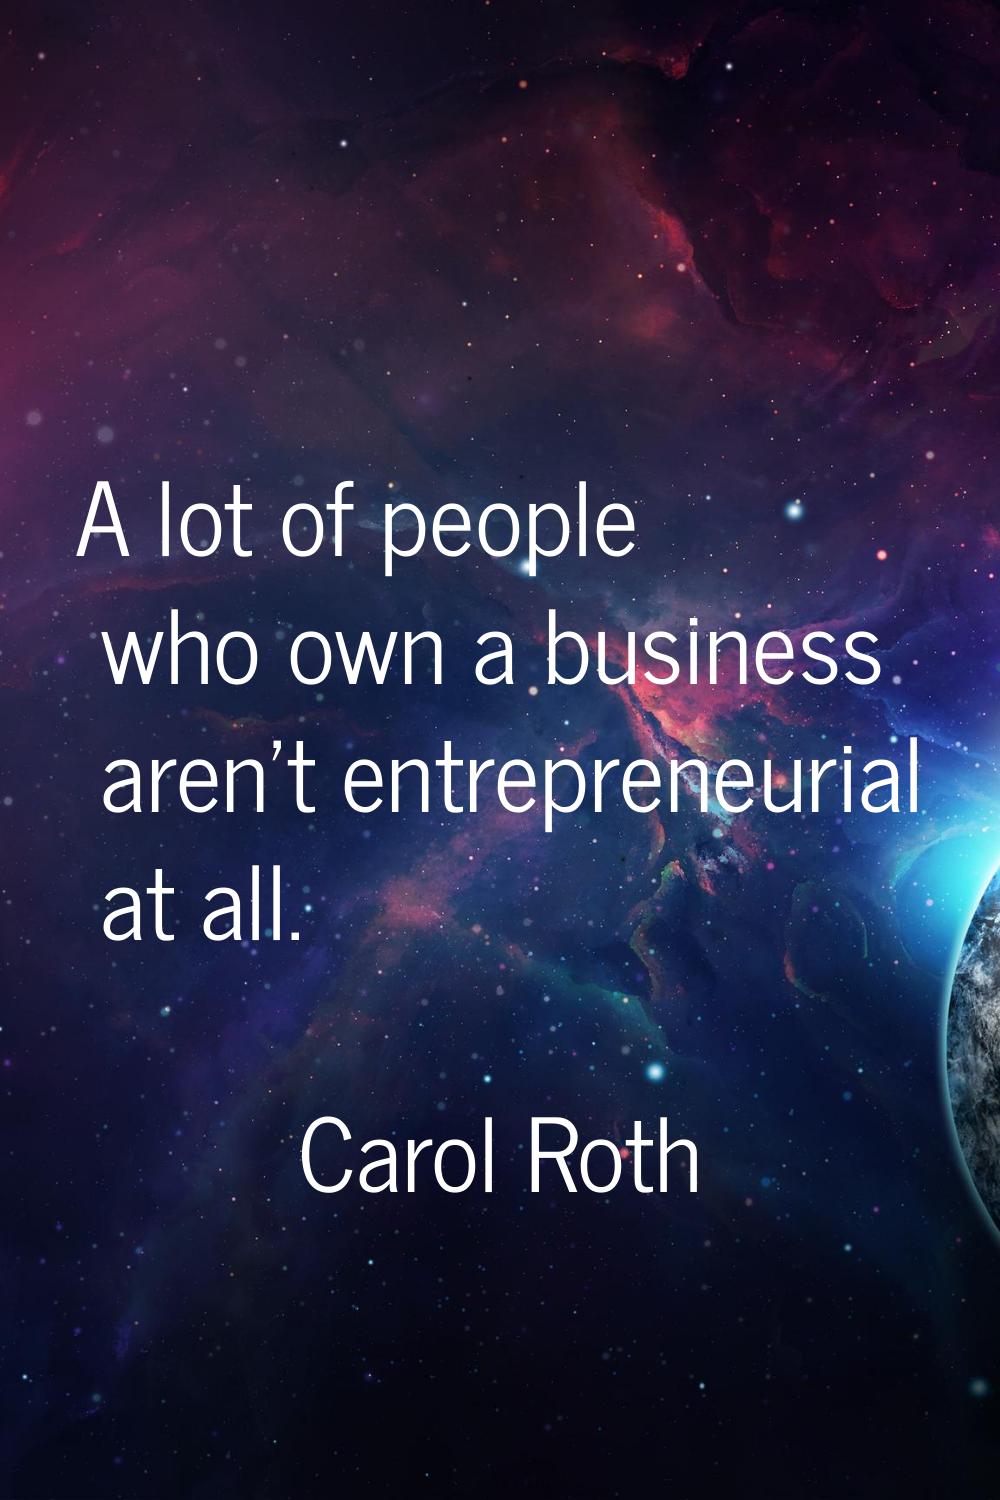 A lot of people who own a business aren't entrepreneurial at all.